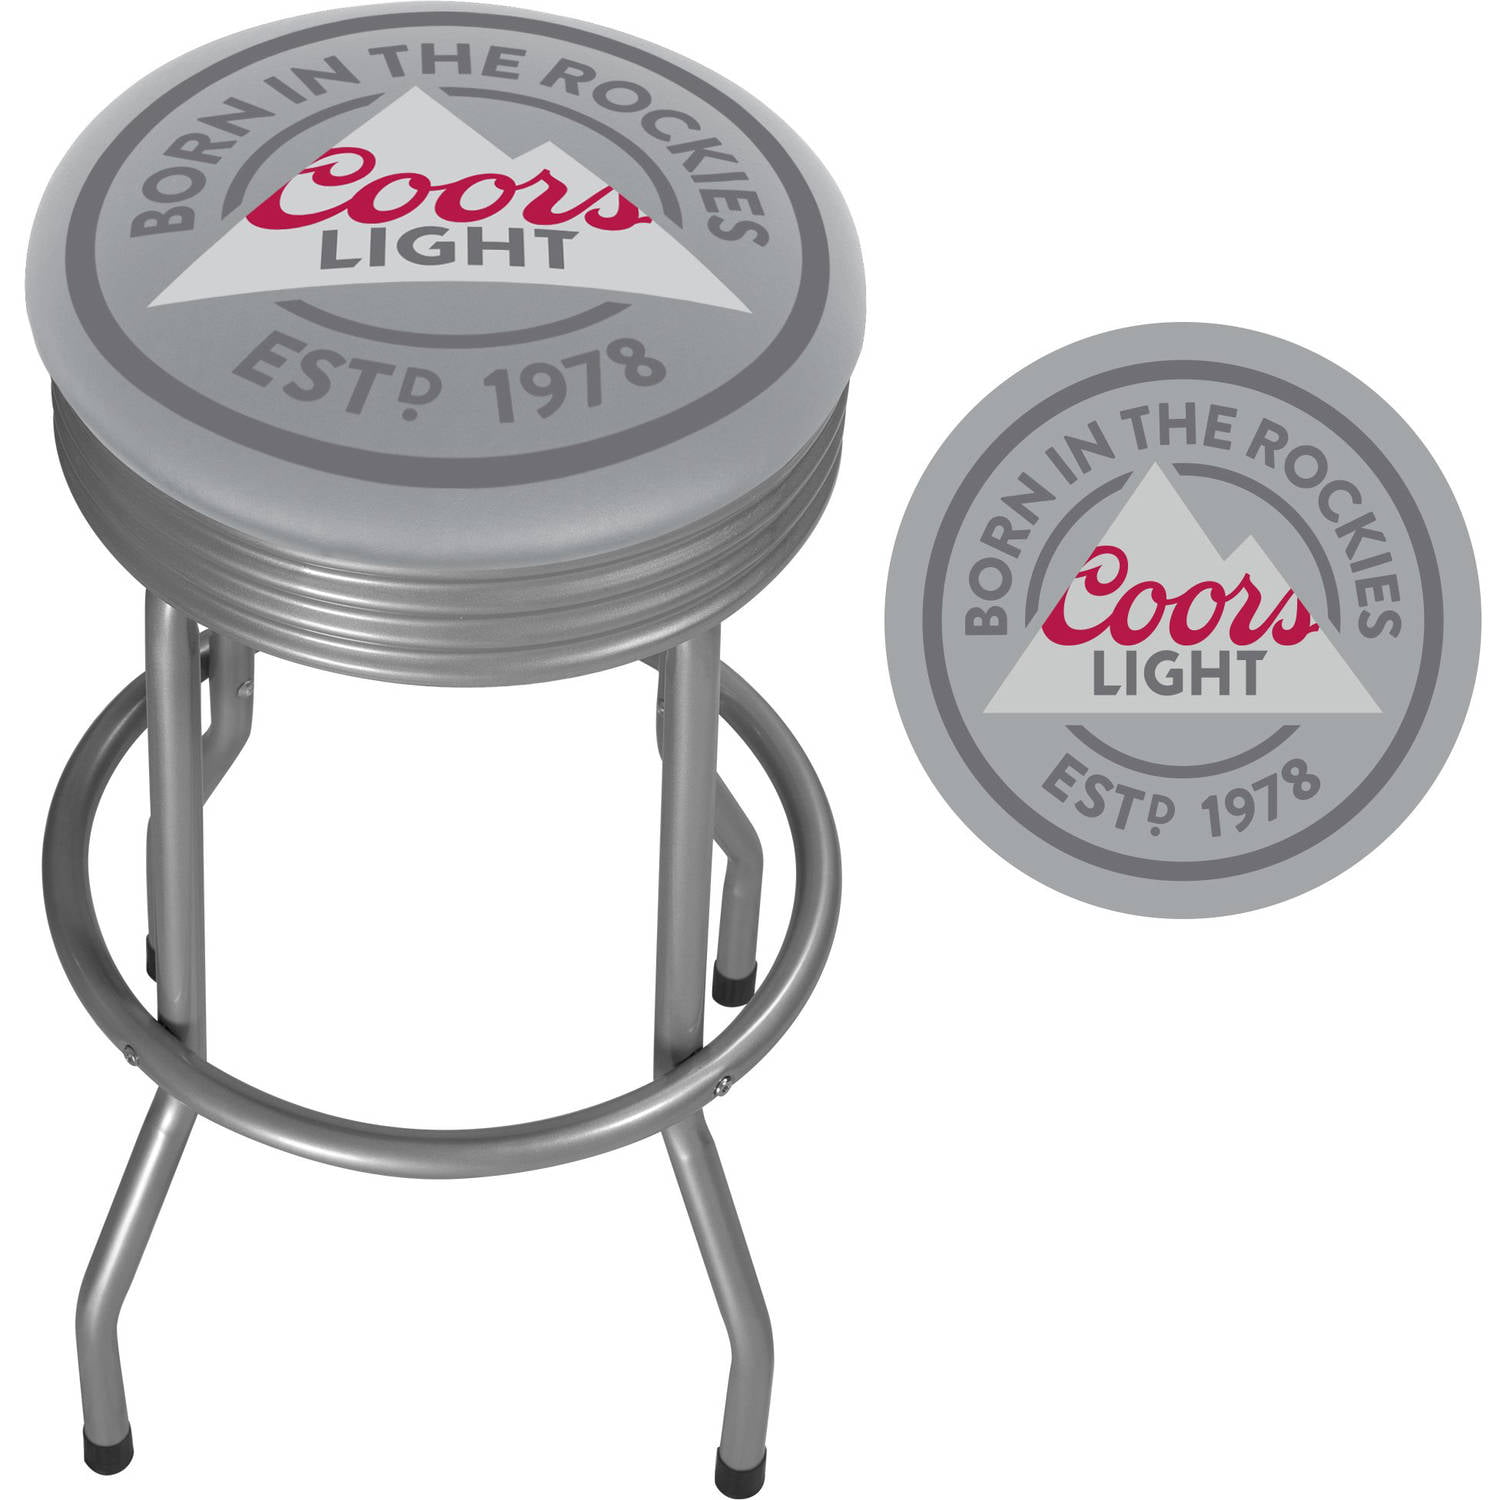 Coors Light Outdoor Ribbed Barstool, Coors Light Padded Bar Stool